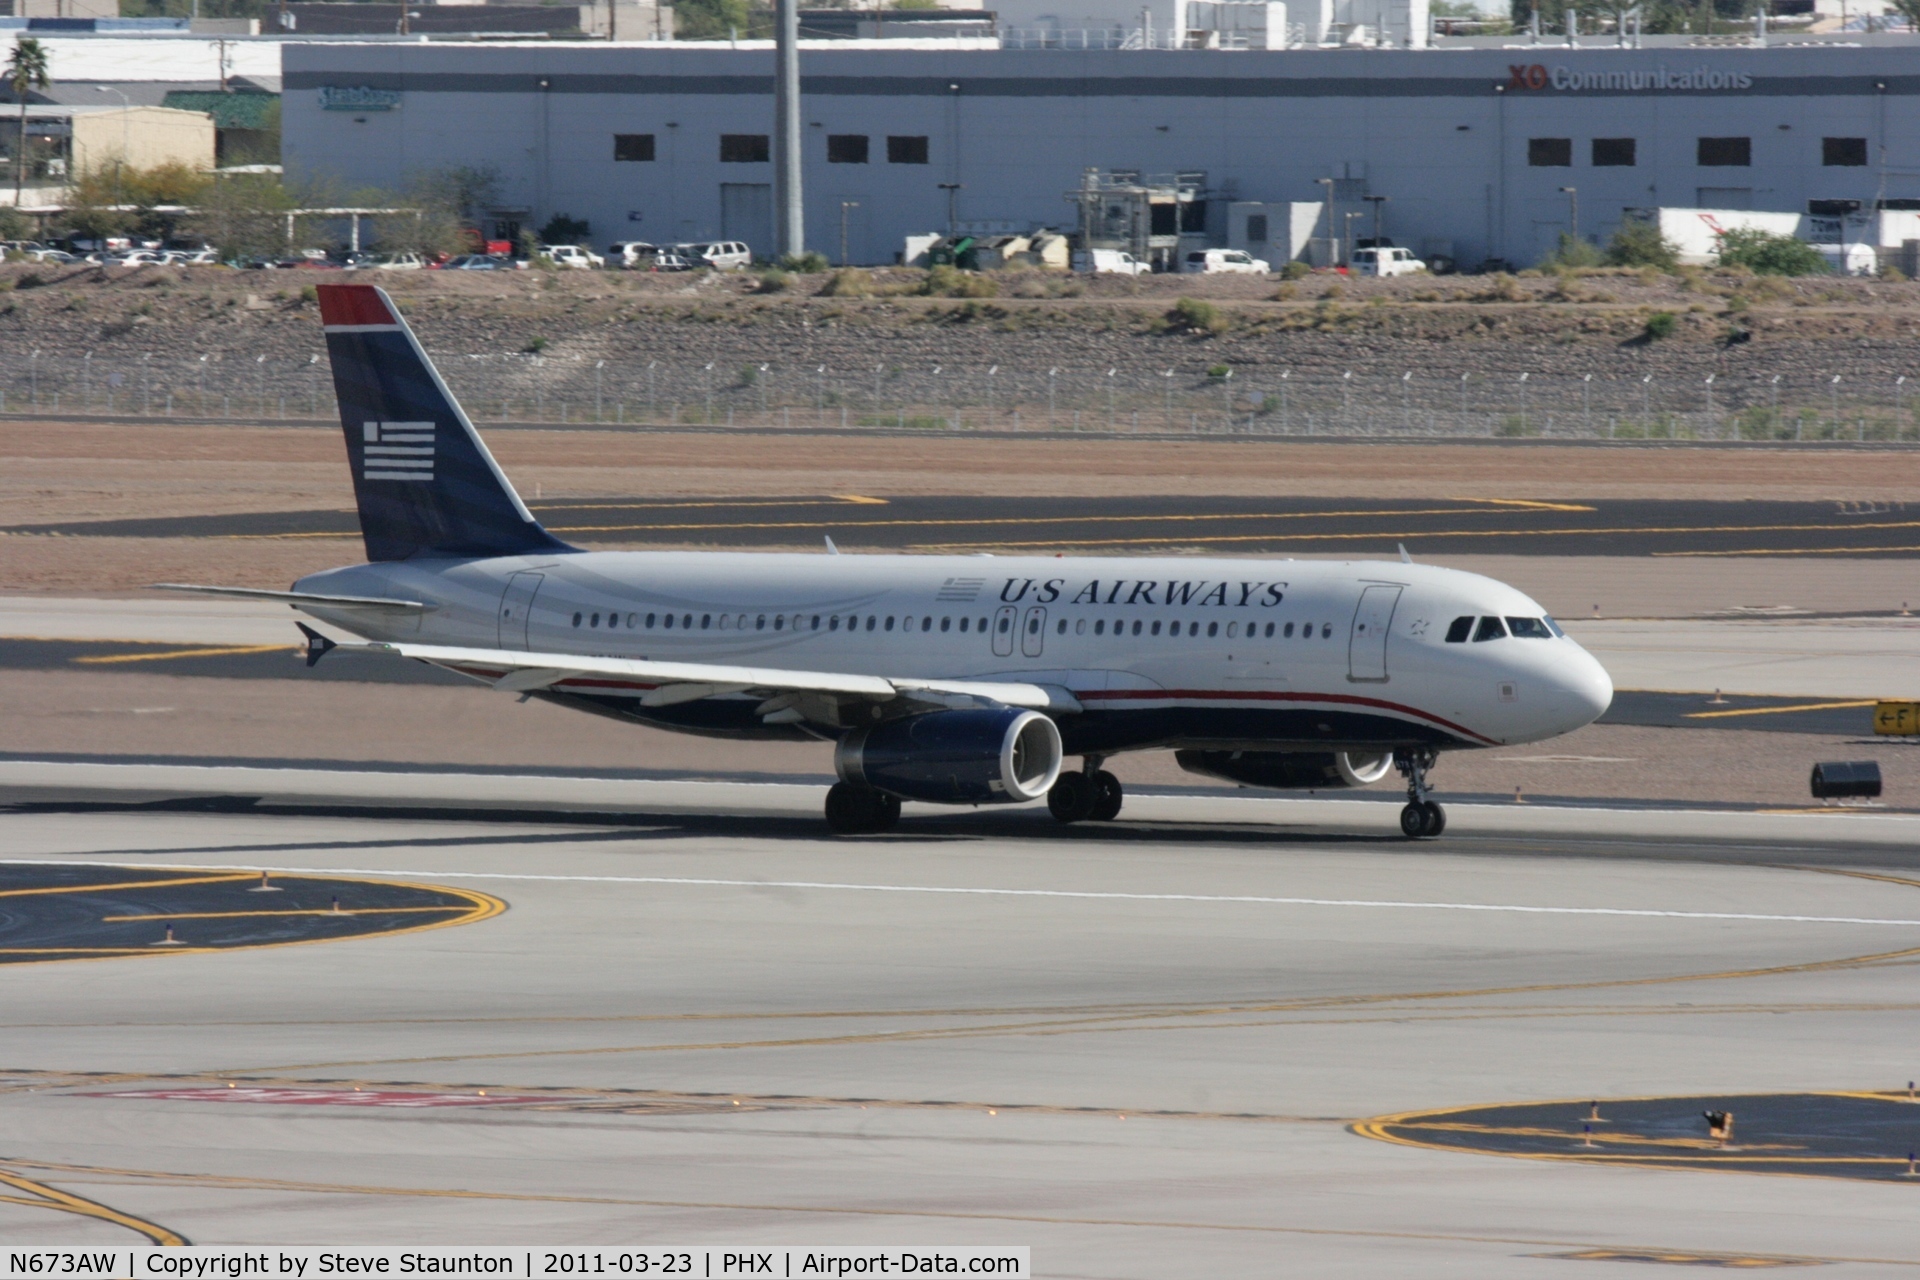 N673AW, 2004 Airbus A320-232 C/N 2312, Taken at Phoenix Sky Harbor Airport, in March 2011 whilst on an Aeroprint Aviation tour